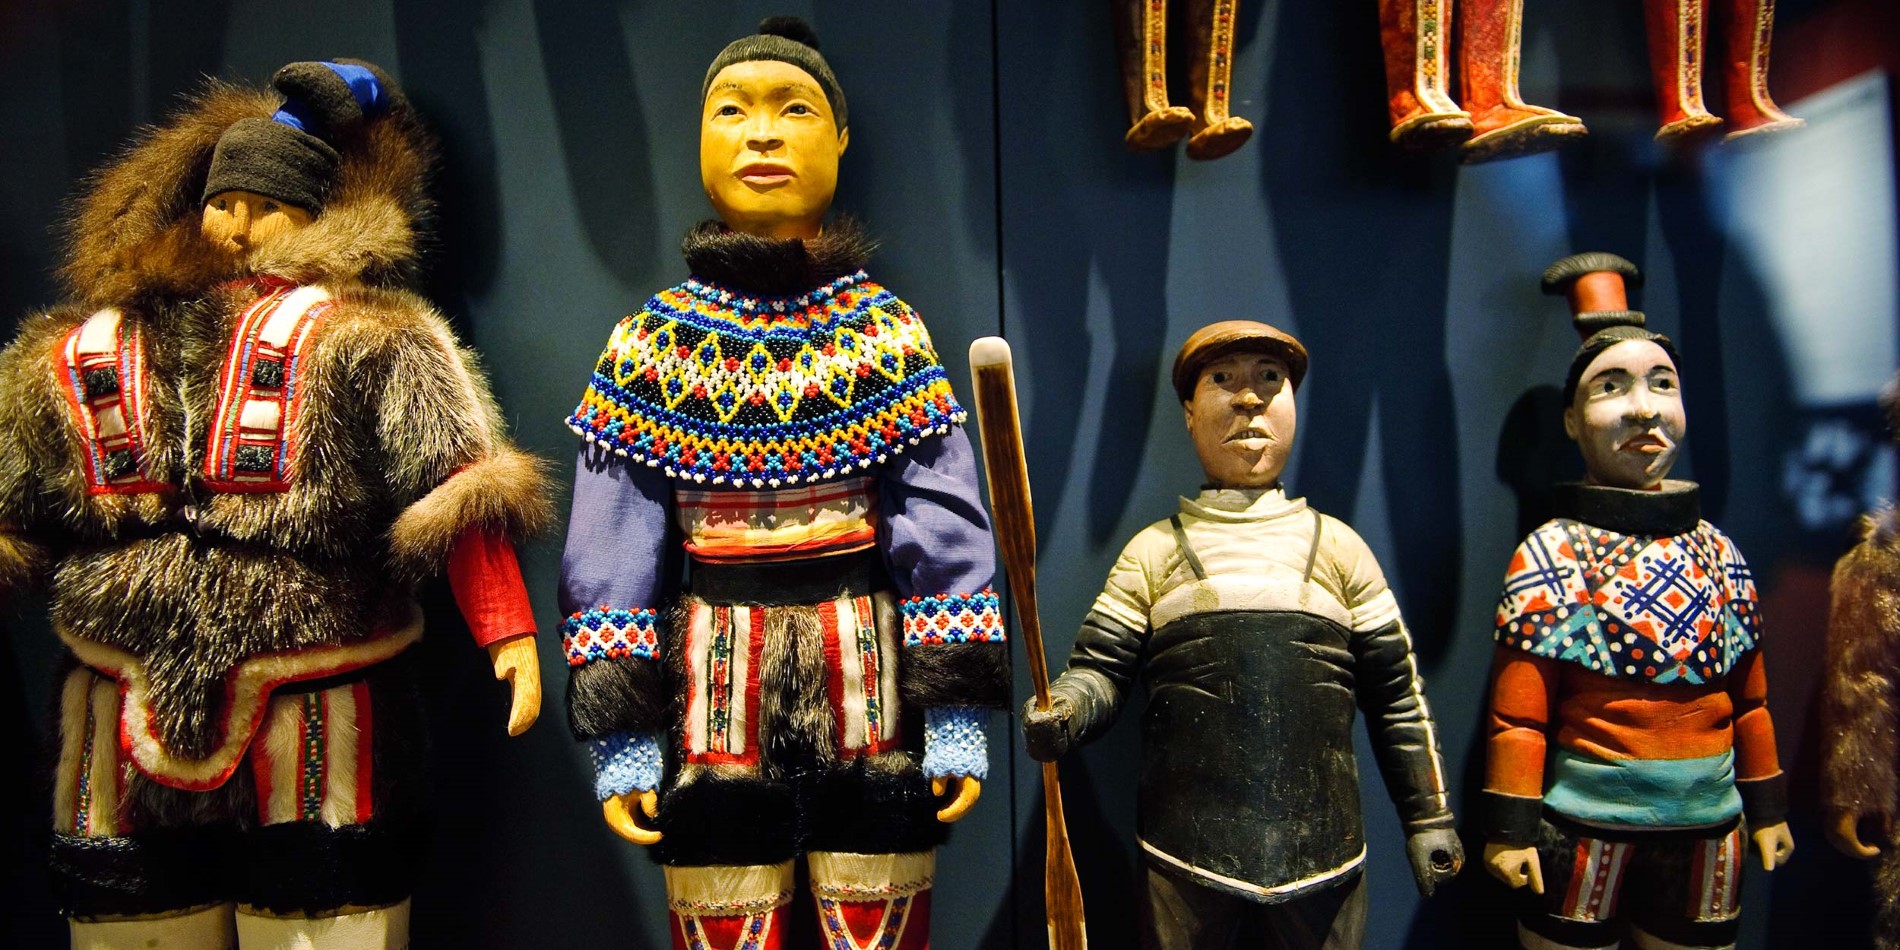 Dolls with traditional clothing